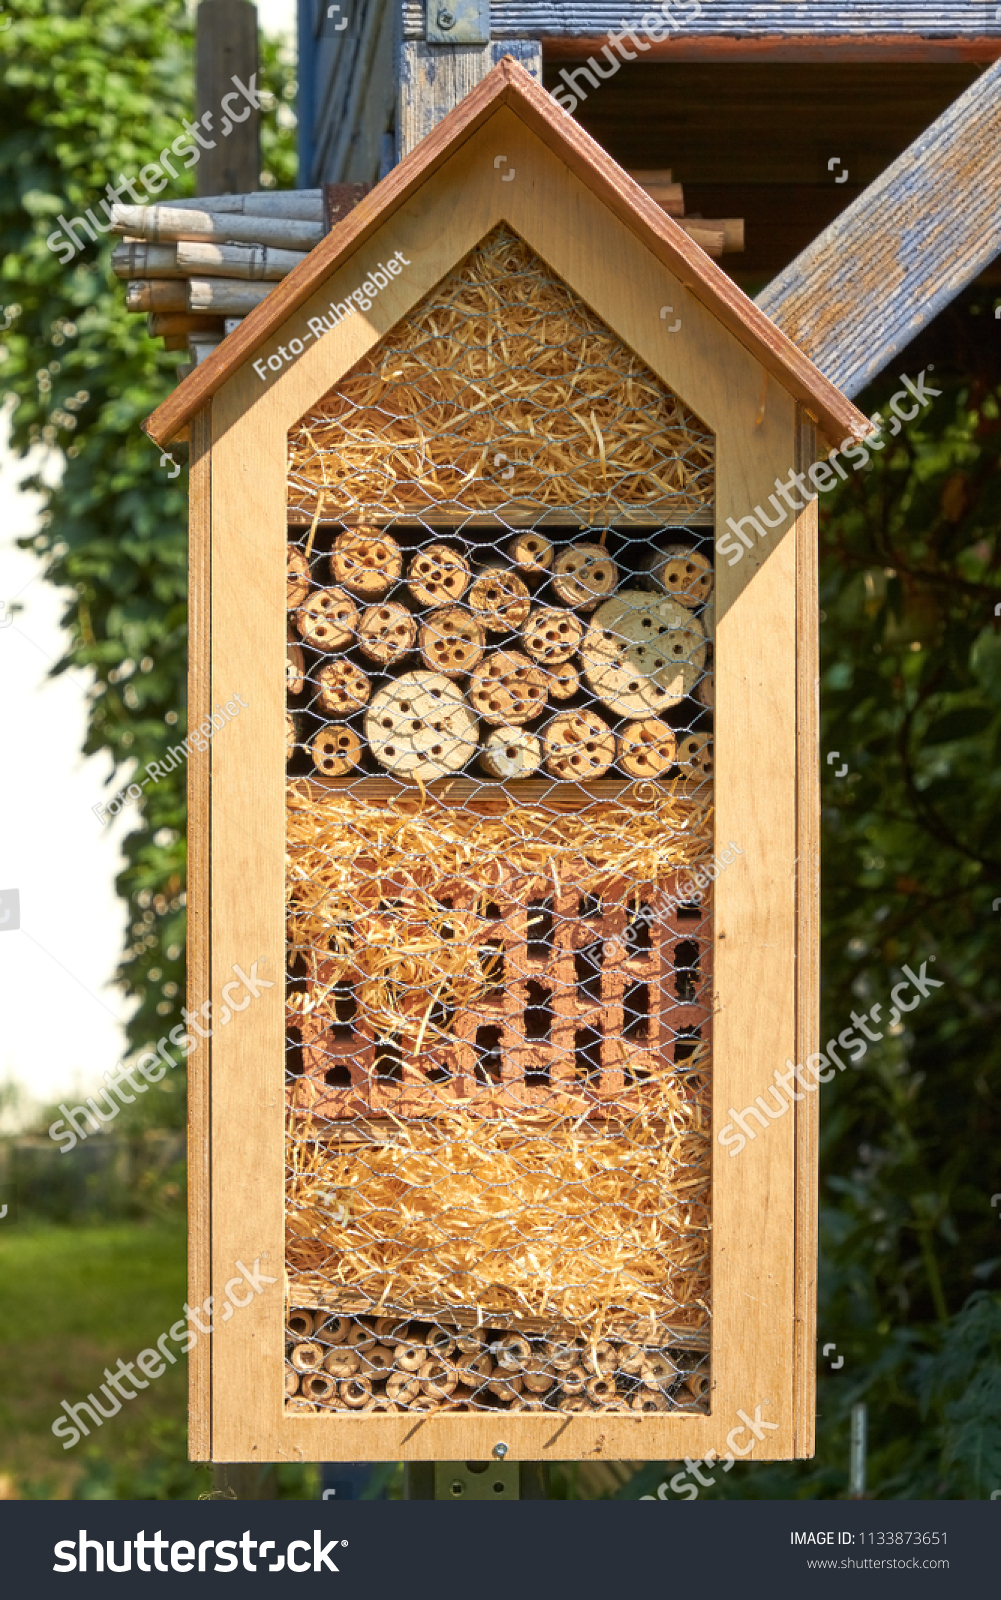 In a garden hangs an insect hotel in the sunlight. #1133873651